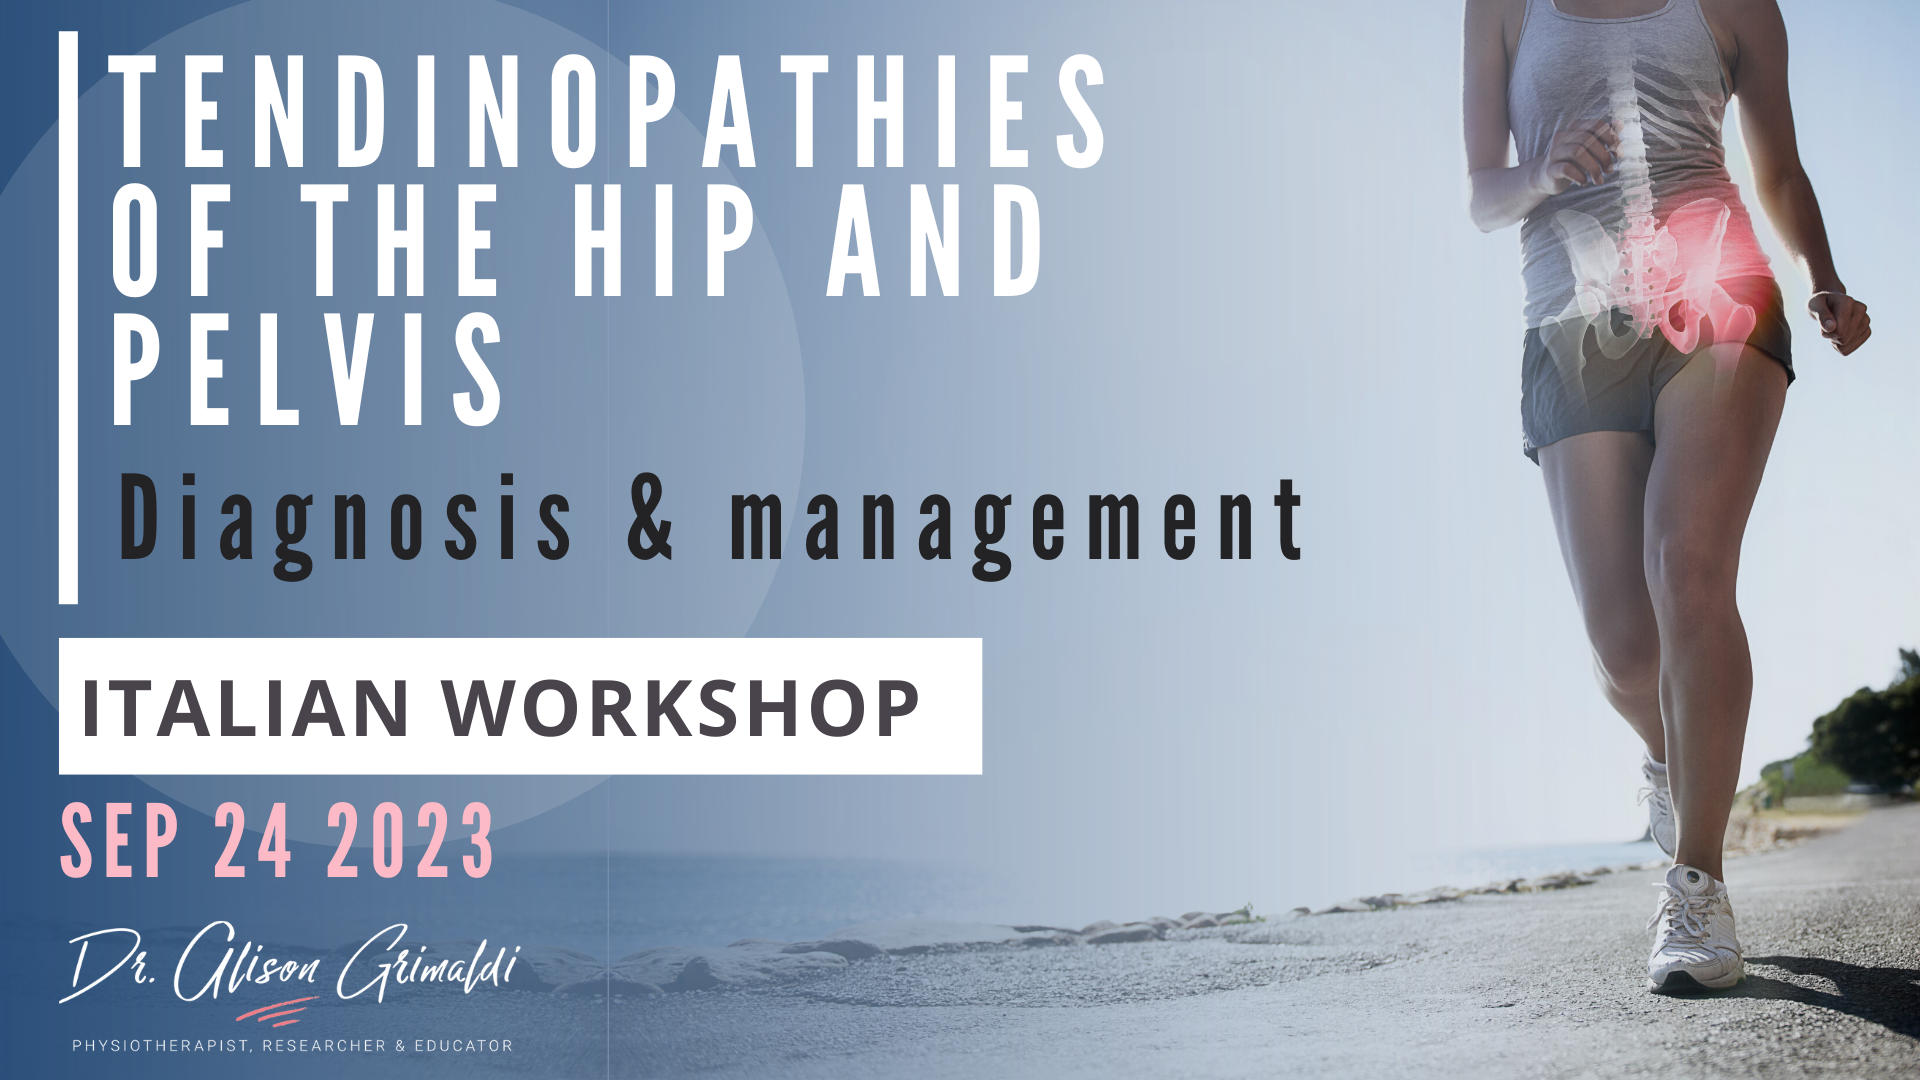 Tendinopathies-of-the-Hip-and-Pelvis-diagnosis-and-management-Translated-in-Italian-2023